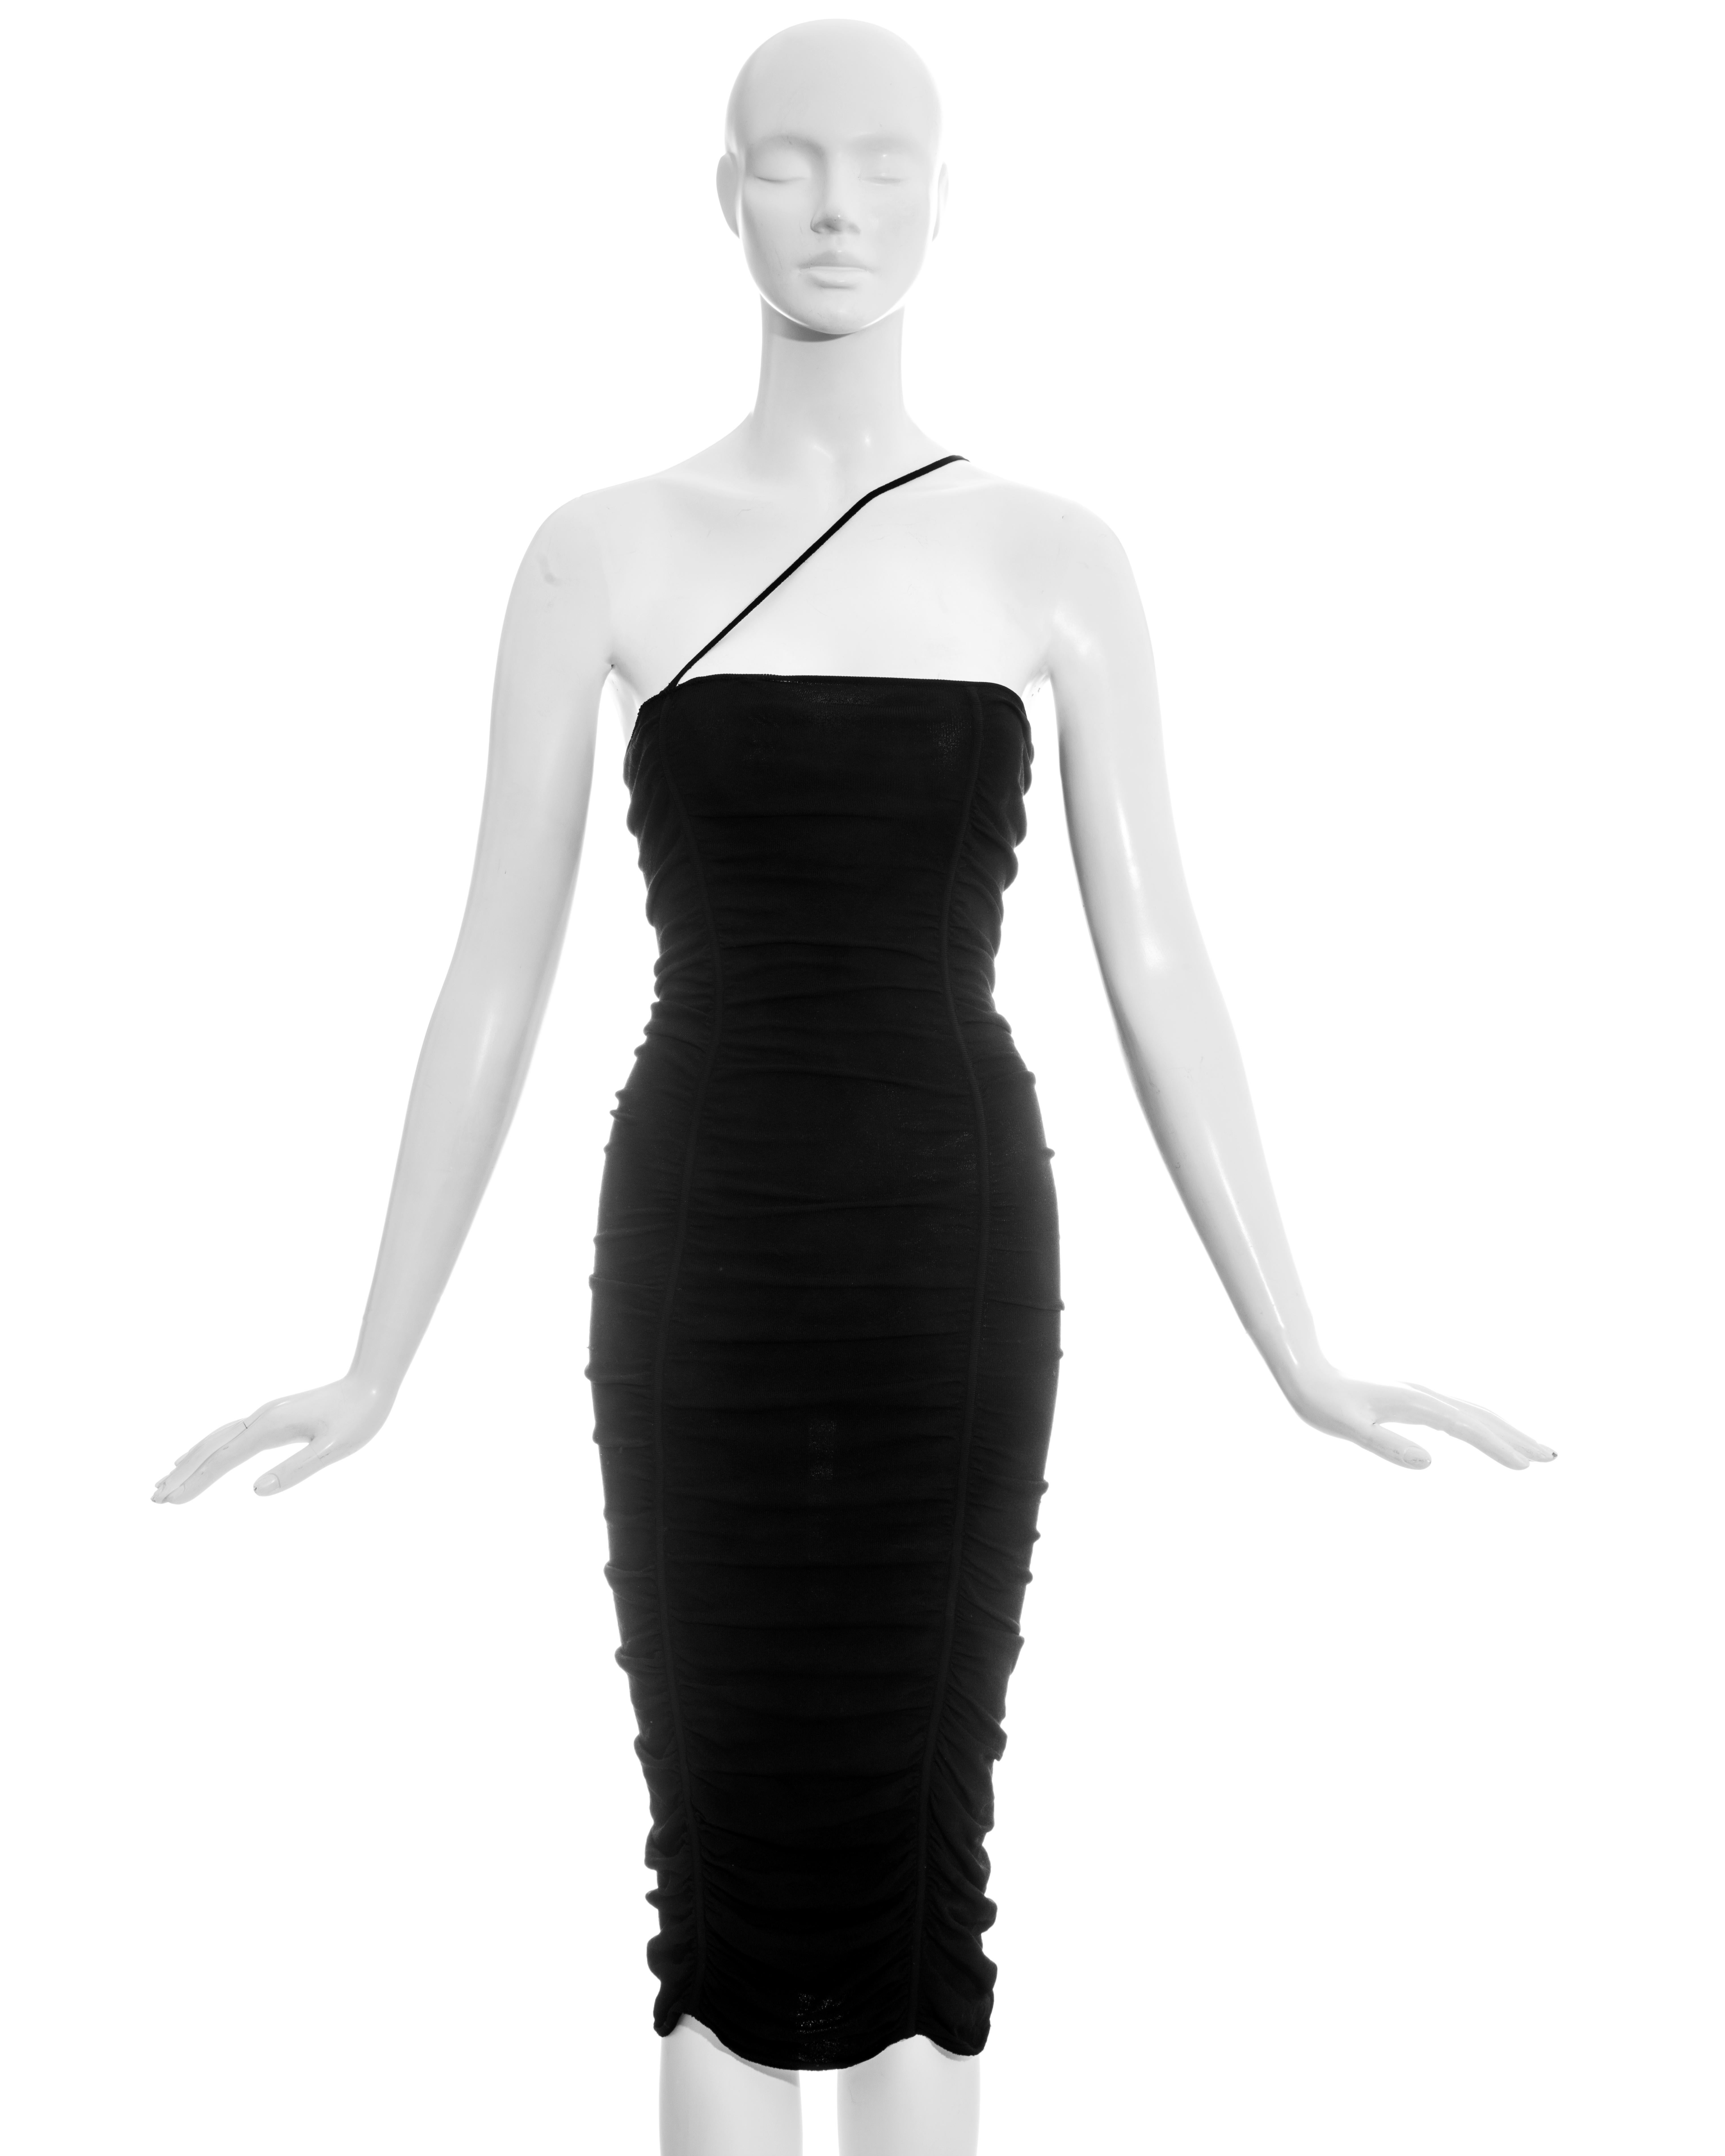 Dolce & Gabbana black rayon ruched figure hugging evening dress with one diagonal spaghetti shoulder strap. Fabric is stretchy. 

Spring-Summer 2001